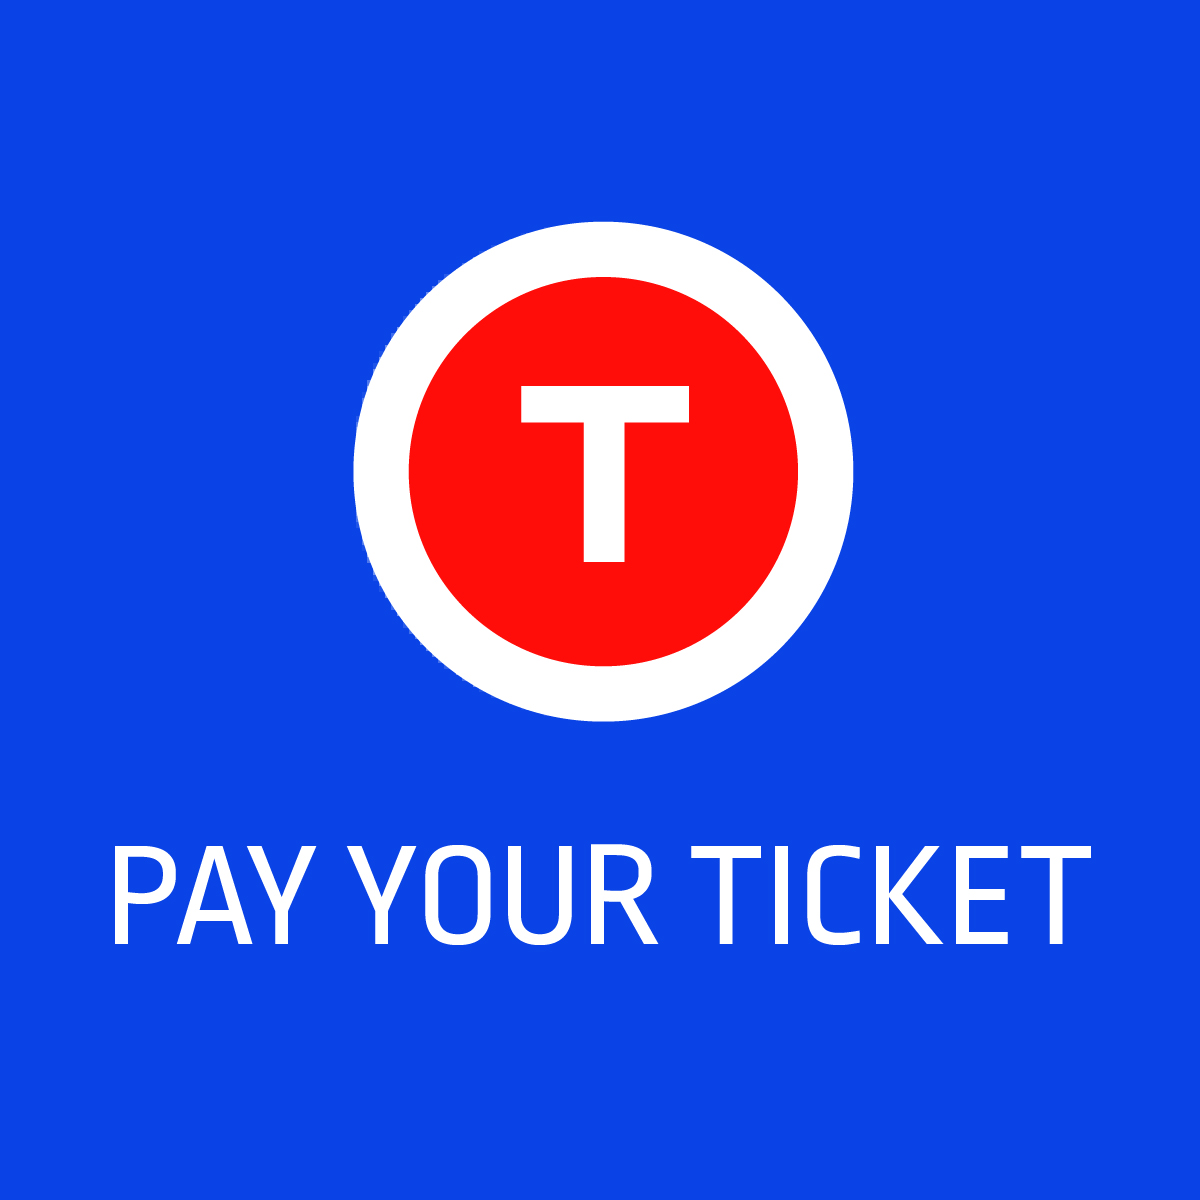 How to pay an out of-state ticket